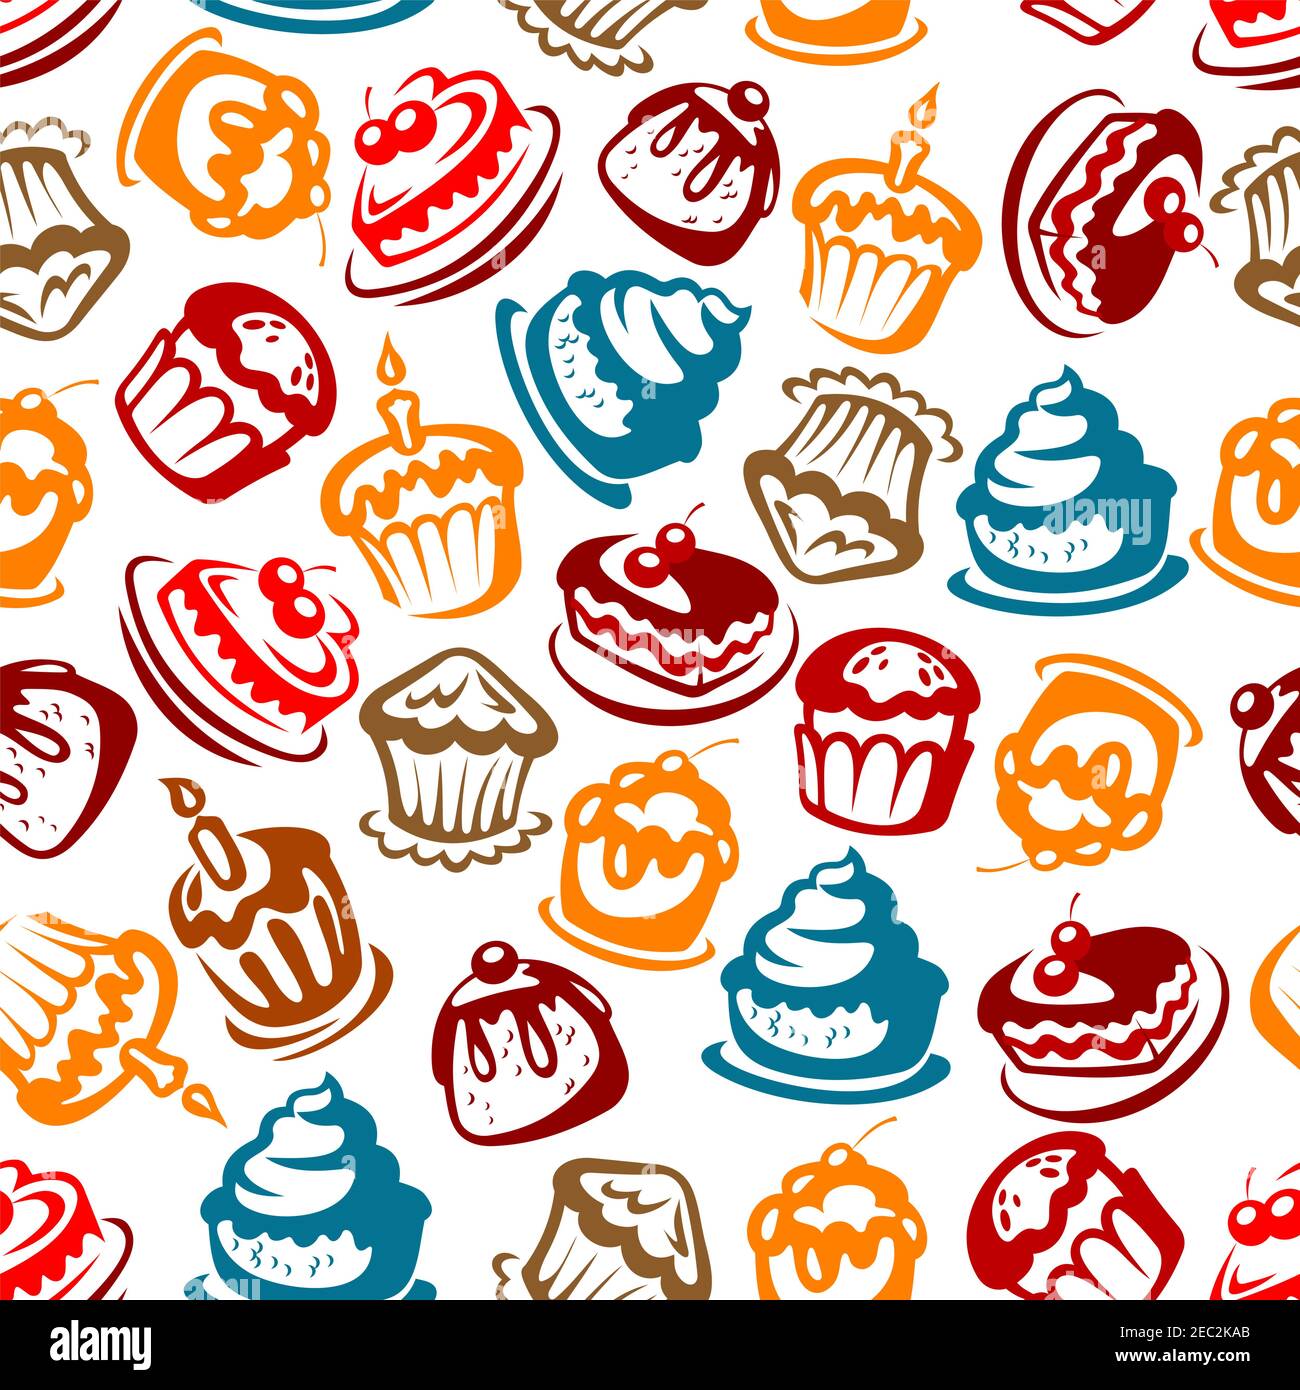 Colorful seamless birthday cakes pattern for celebration party and festive backdrop design with bright sketches of cakes, cupcakes, berry pies and muf Stock Vector